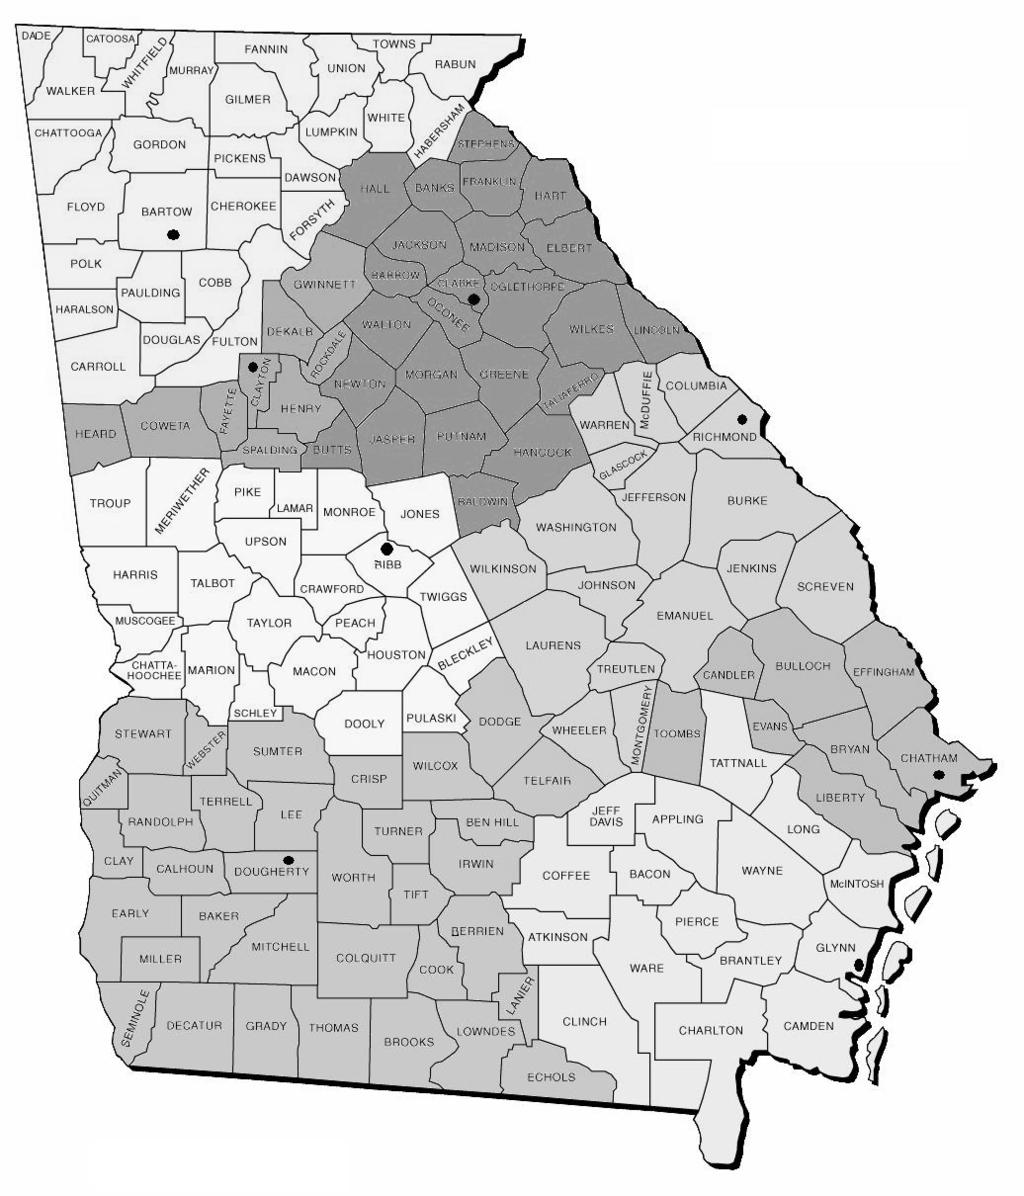 GEORGIA PROTECTION DIVISION MANAGEMENT DISTRICT OFFICES DISTRICT